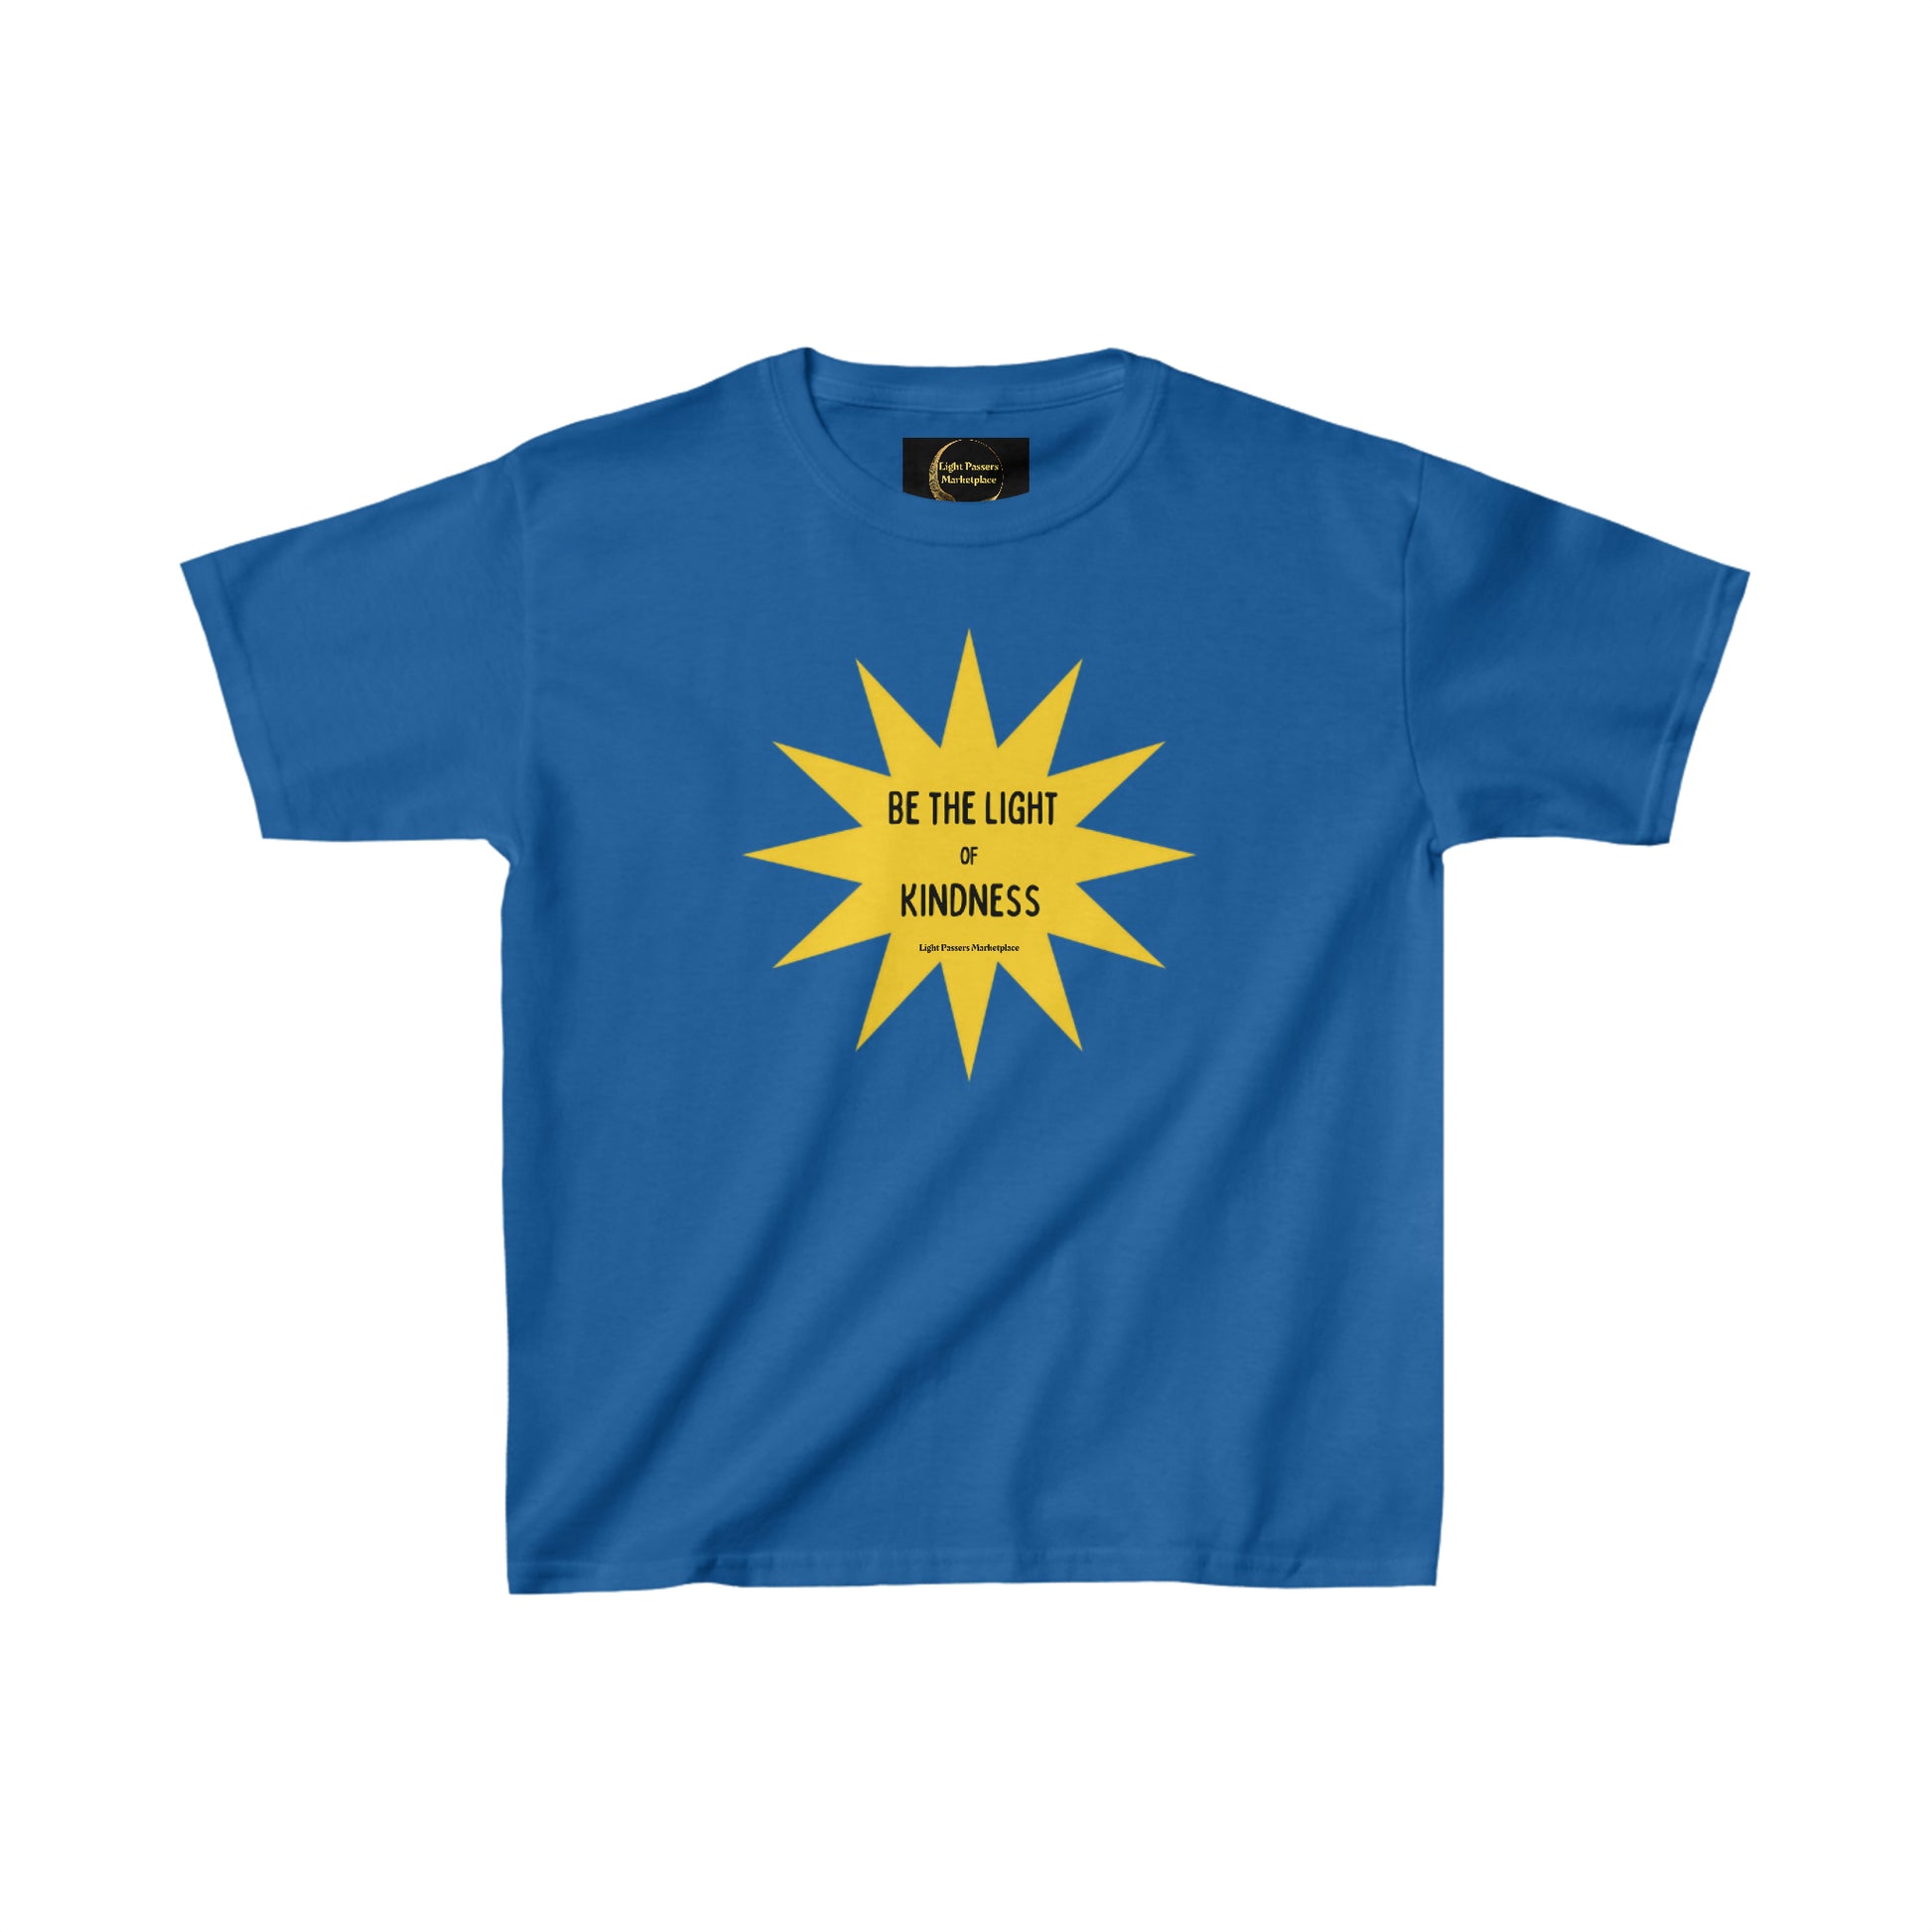 Youth cotton T-shirt with a yellow star and black text design. Made of 100% cotton, midweight fabric, tear-away label, and durable twill tape shoulders. Classic fit, seamless sides, and curl-resistant collar.